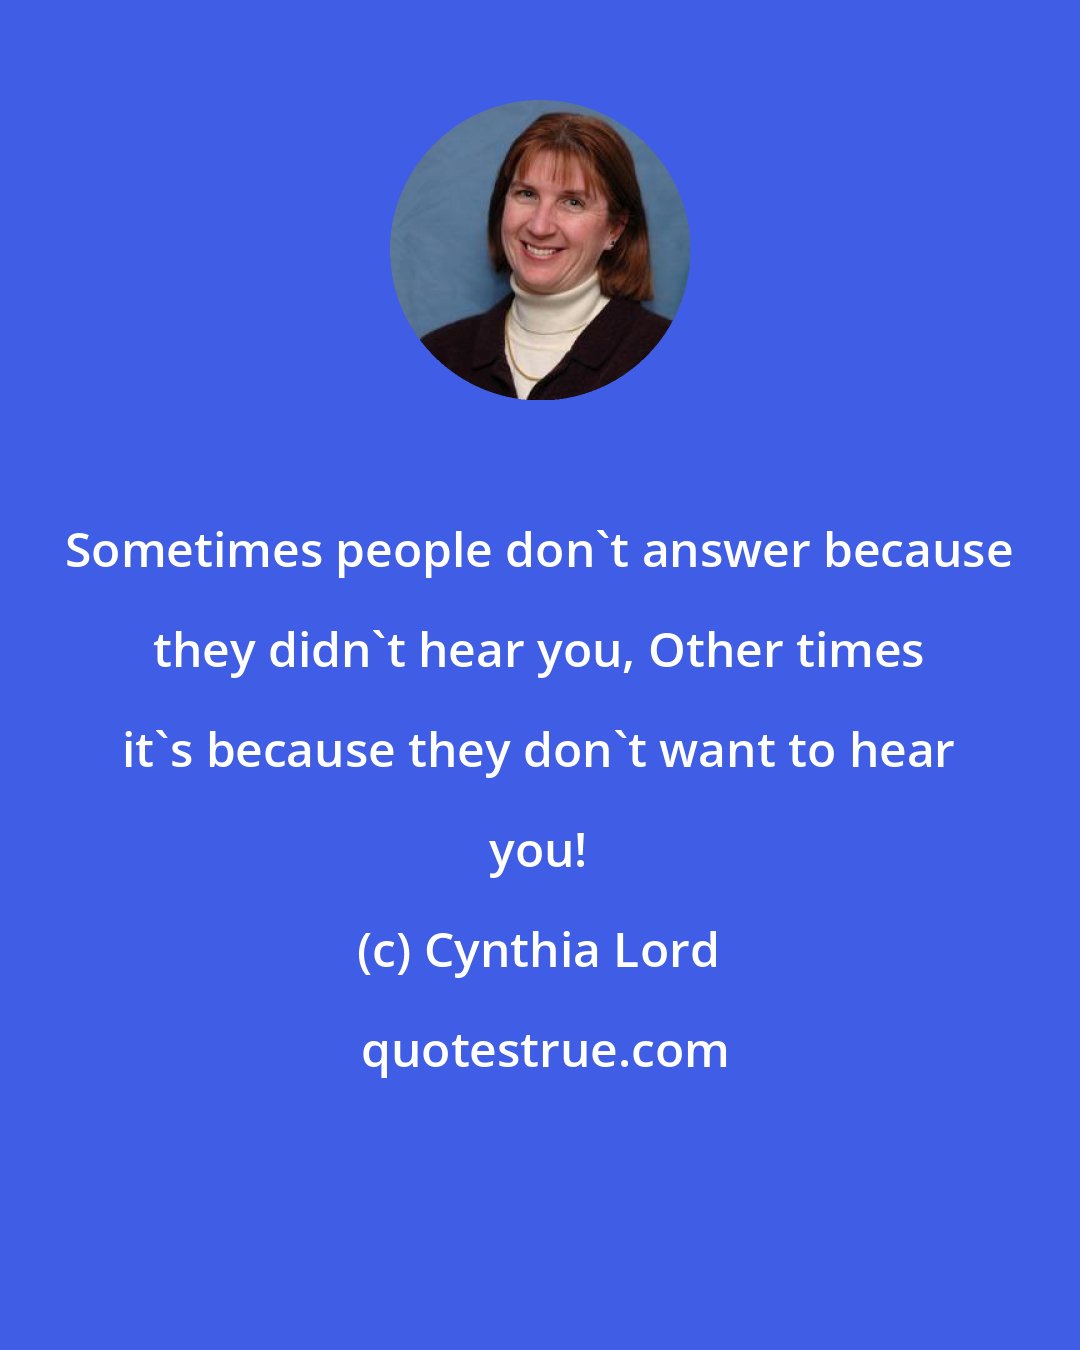 Cynthia Lord: Sometimes people don't answer because they didn't hear you, Other times it's because they don't want to hear you!